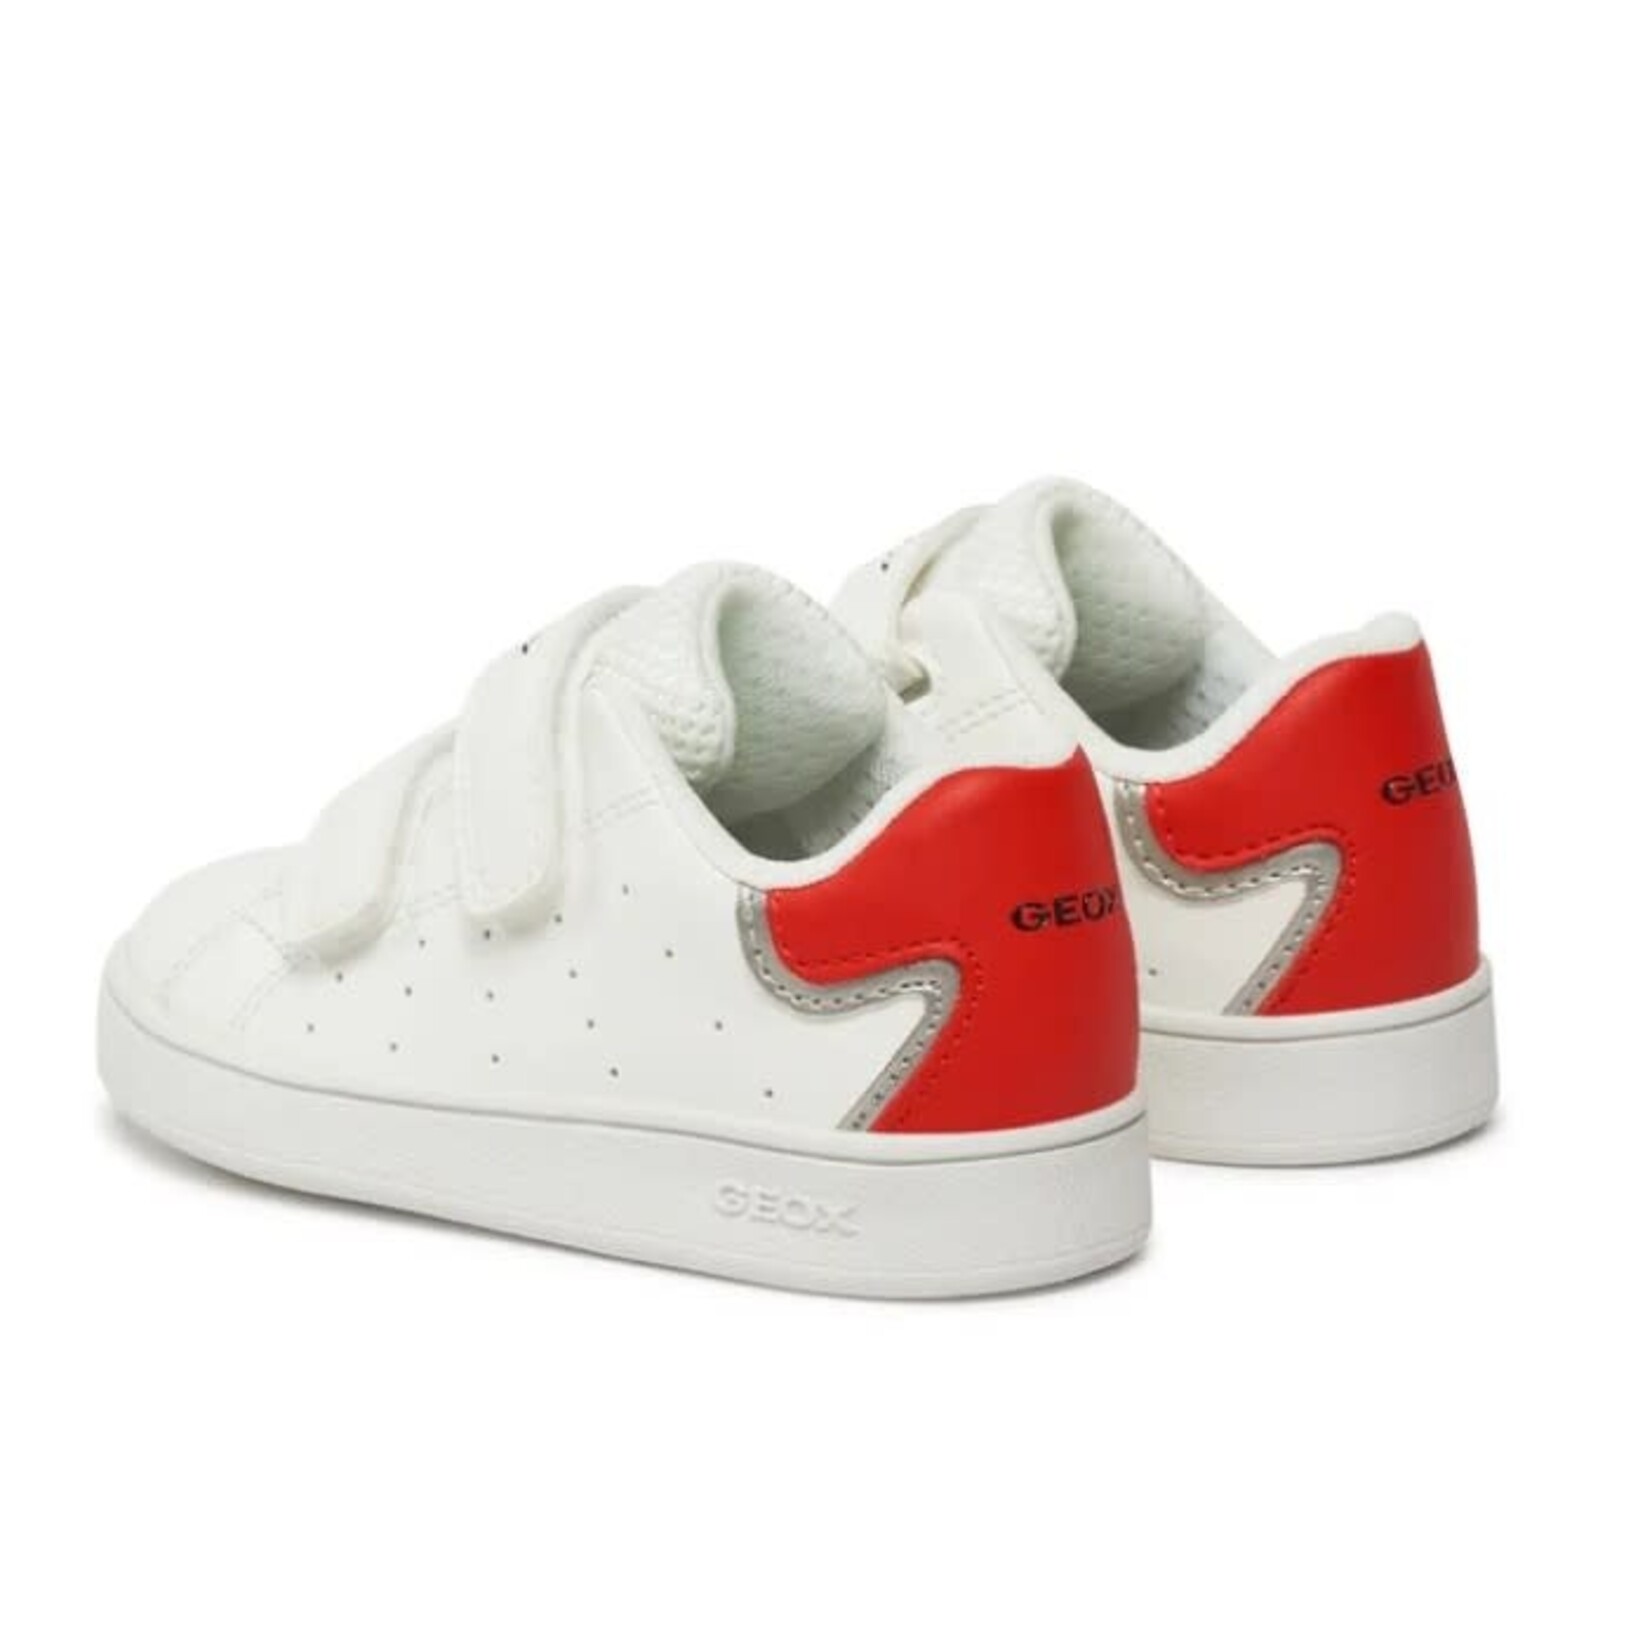 Geox GEOX - White and red synthetic leather shoes 'Eclyper - White/red'